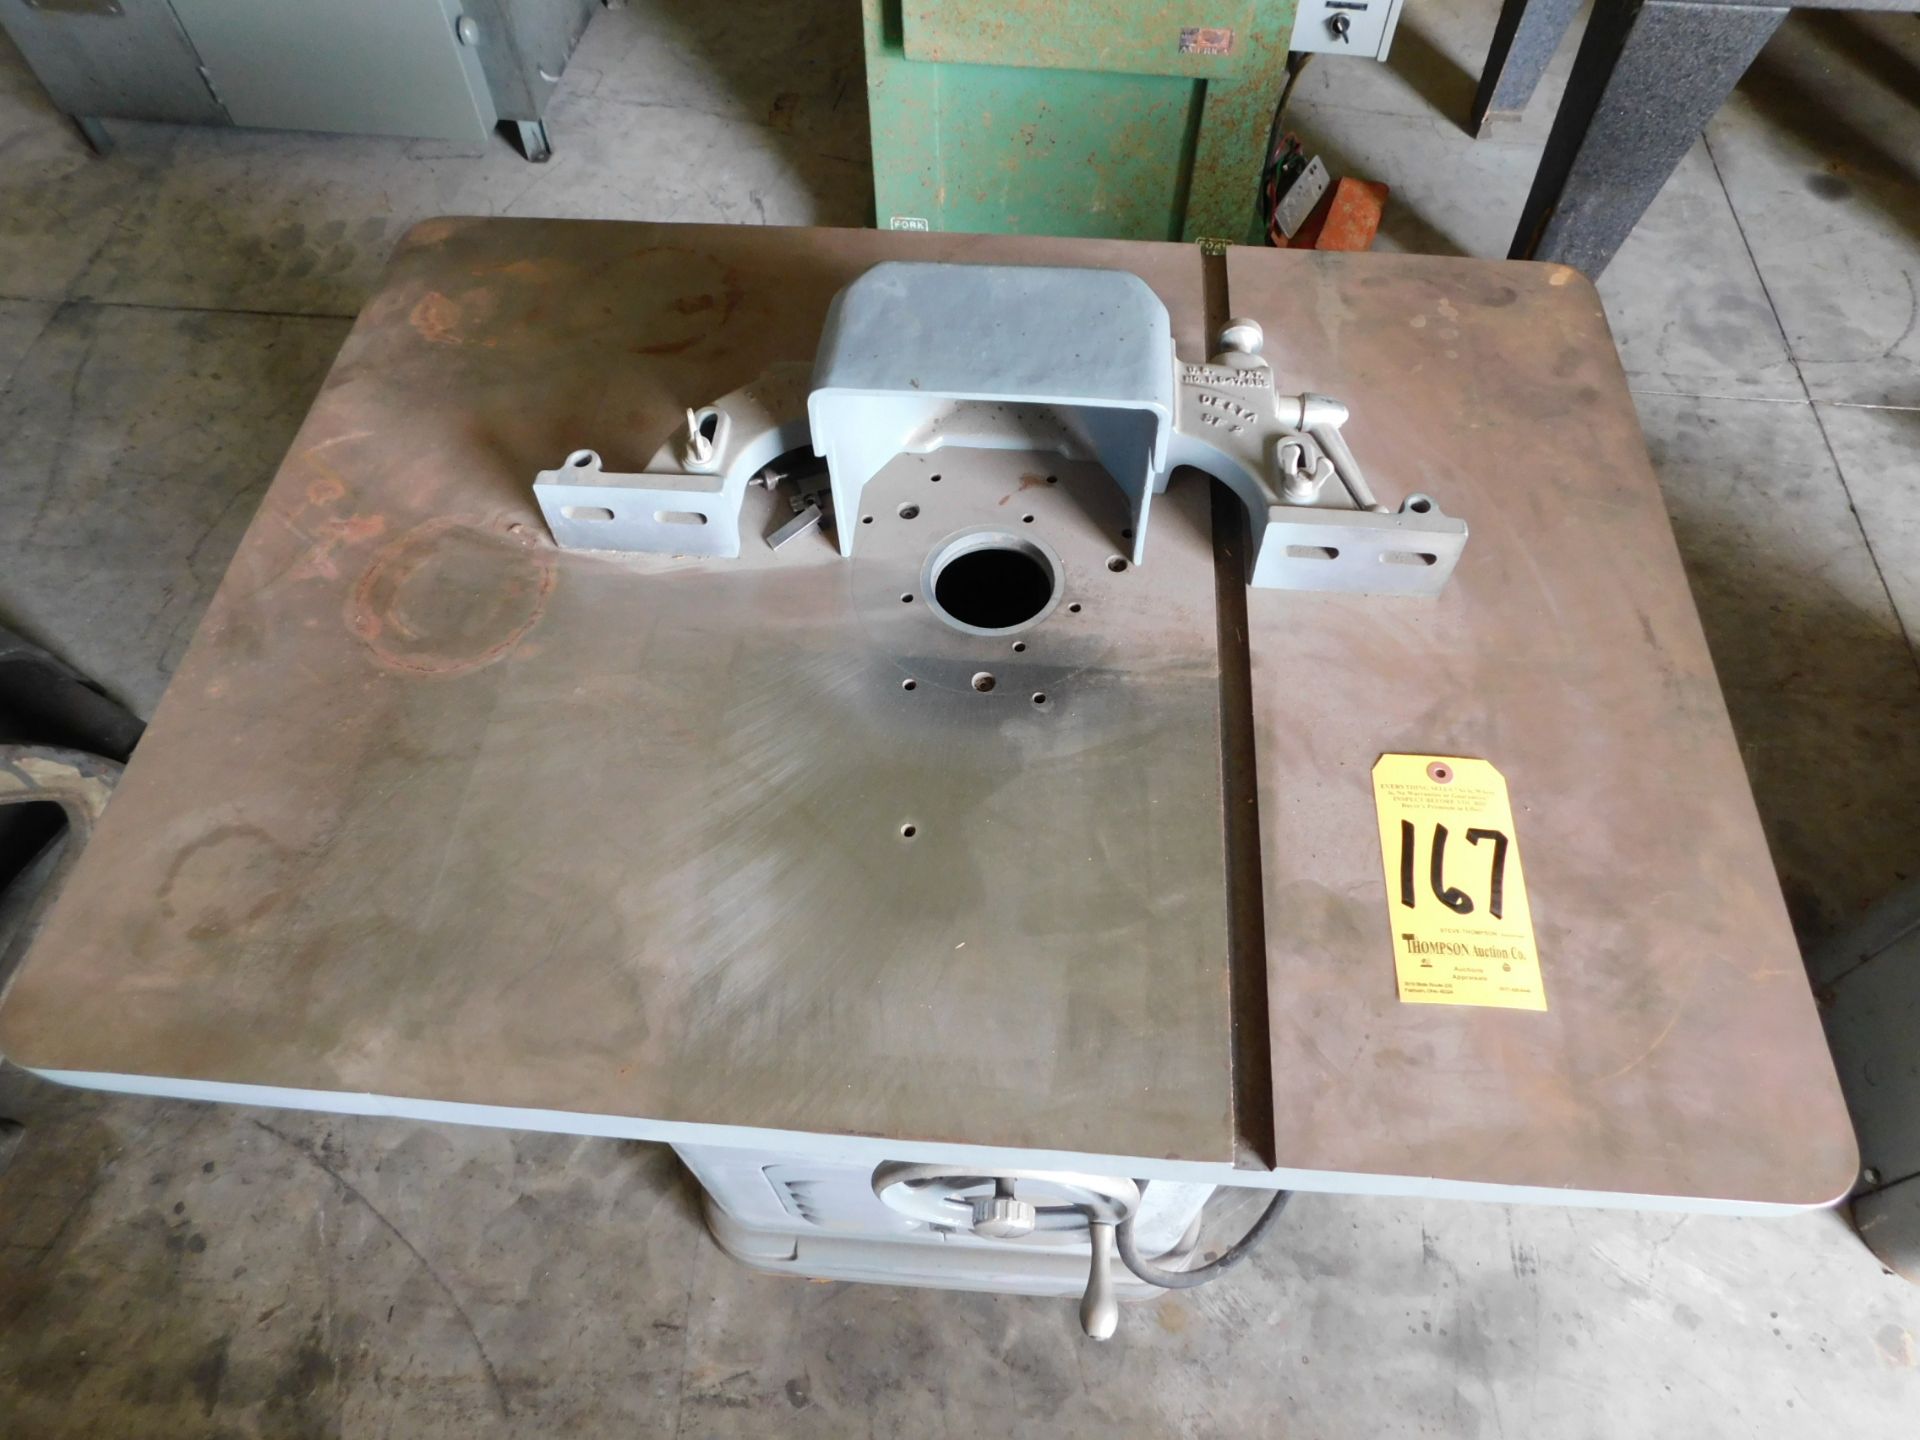 Rockwell Delta Spindle Shaper, s/n 105-5098 - Image 3 of 5